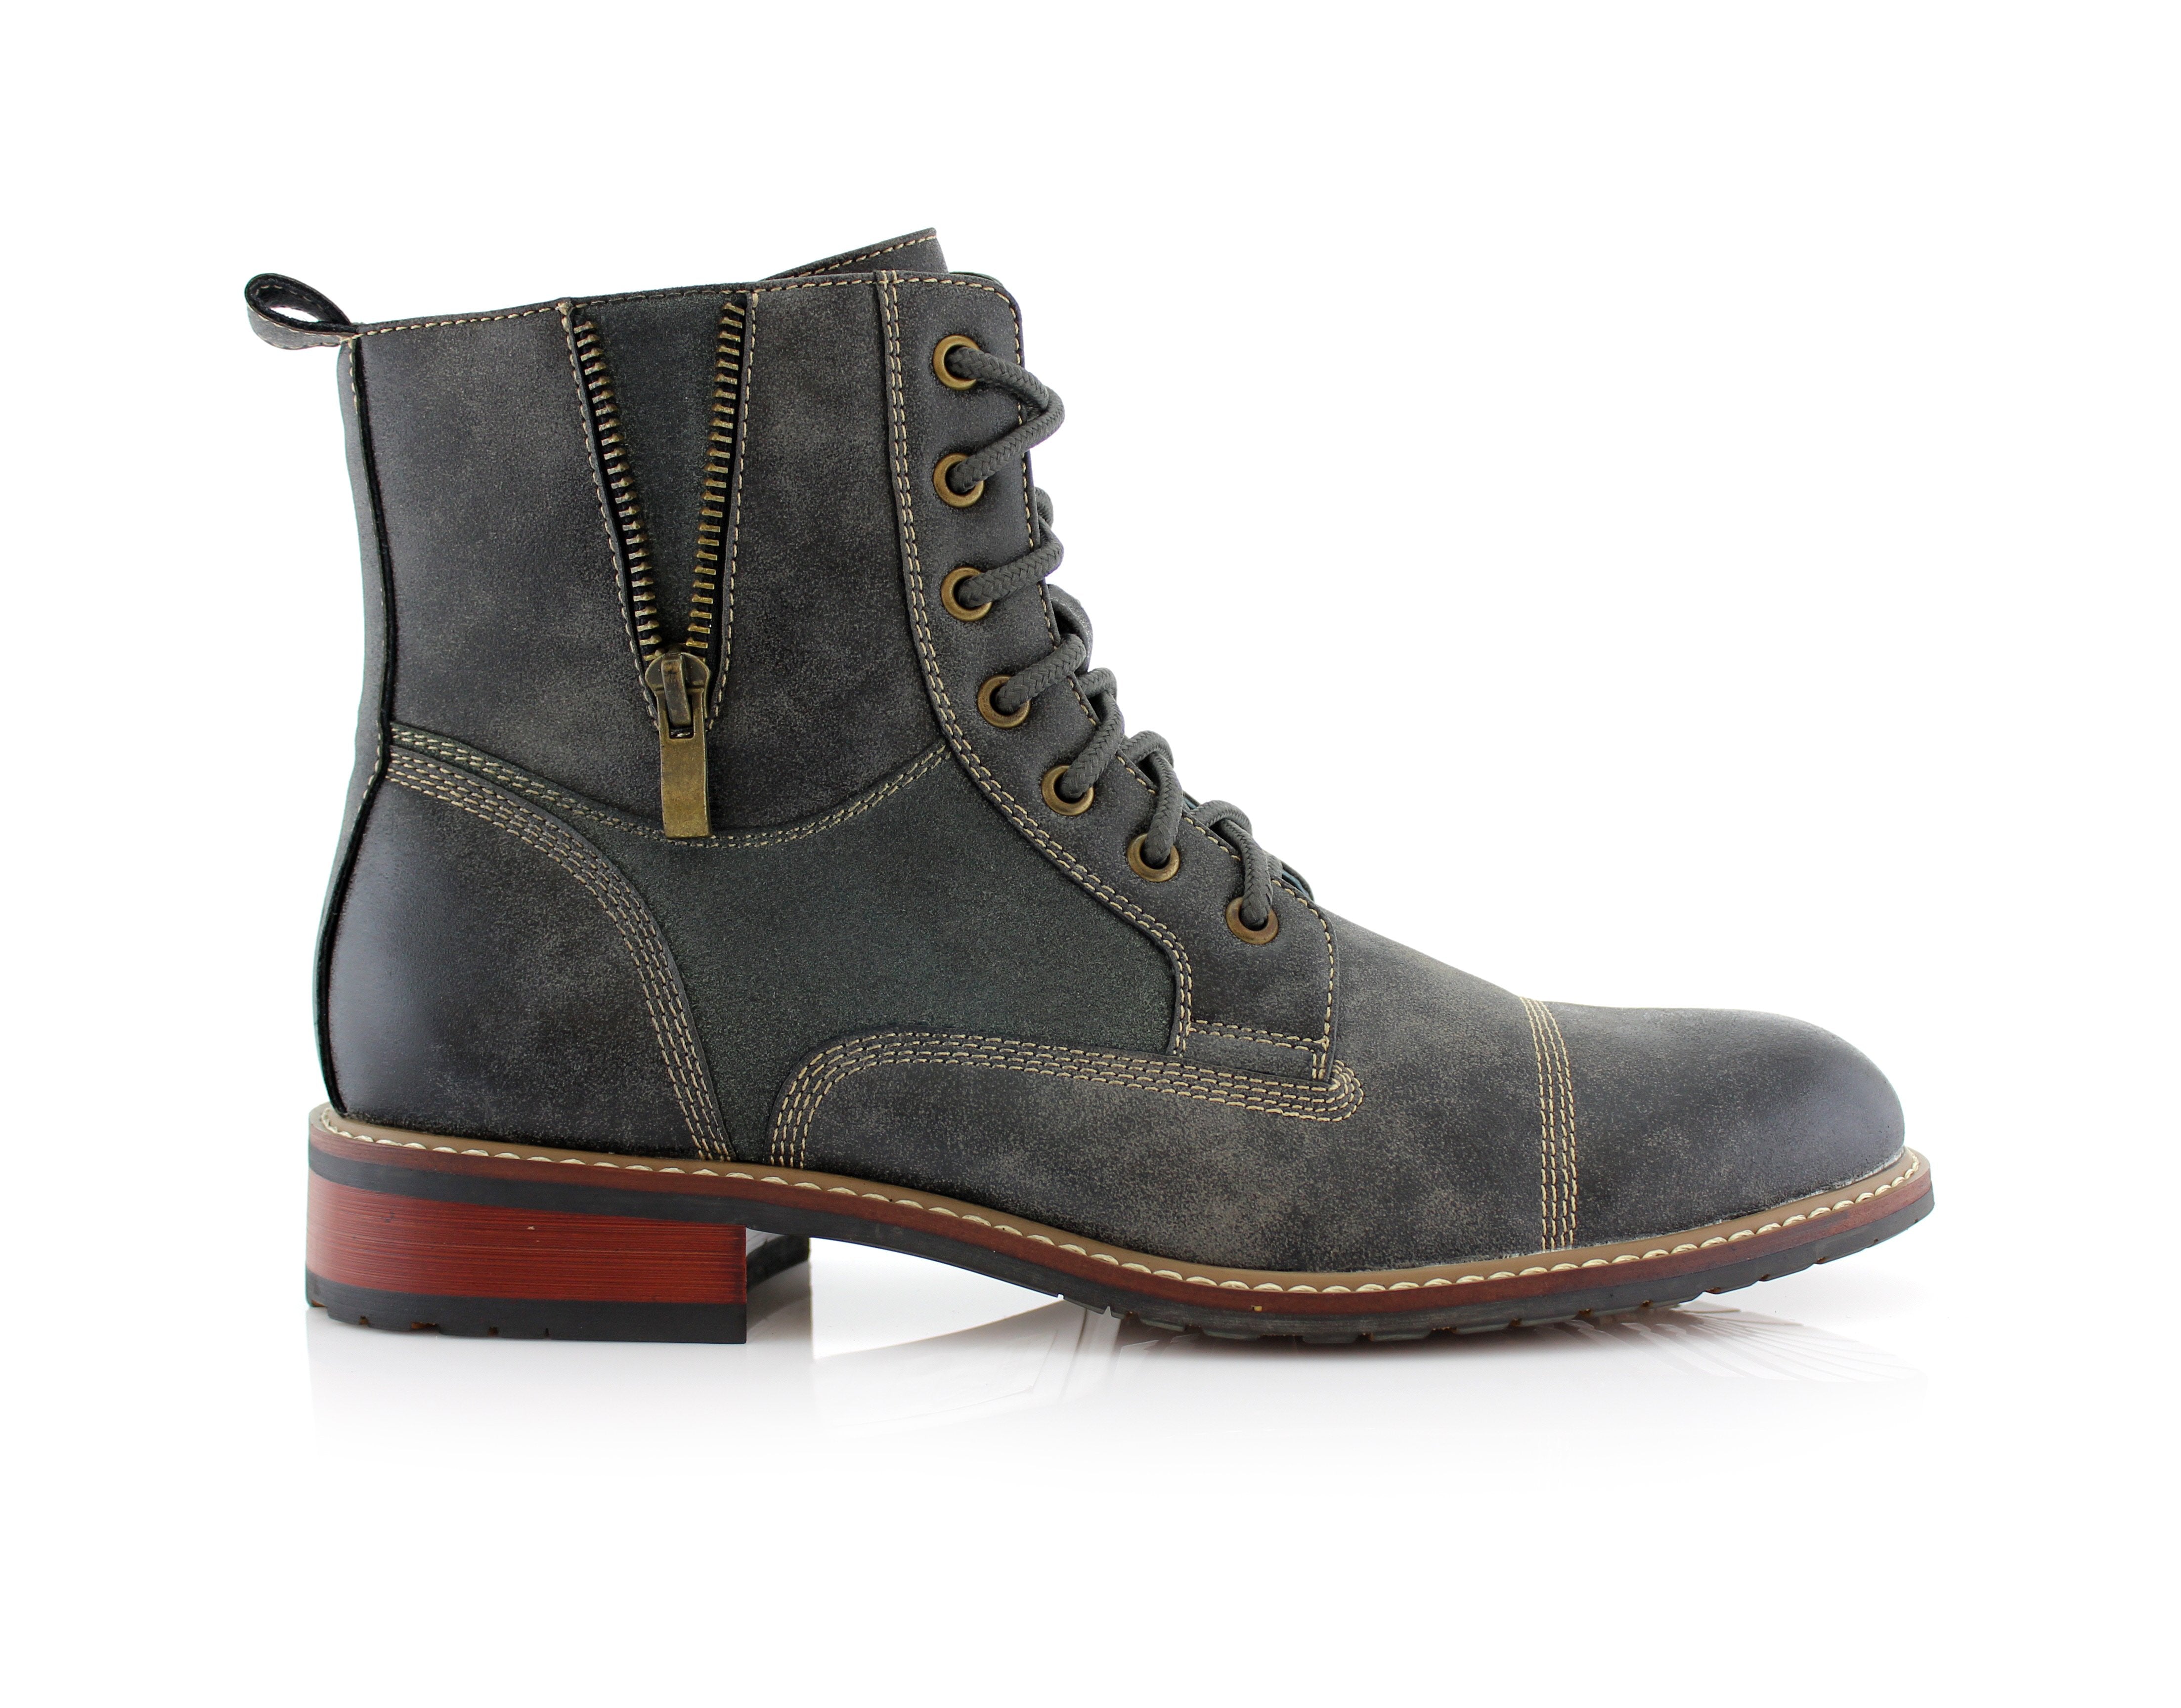 Duo-Textured Zipper Closure Combat Boots | Andy by Ferro Aldo | Conal Footwear | Outer Side Angle View